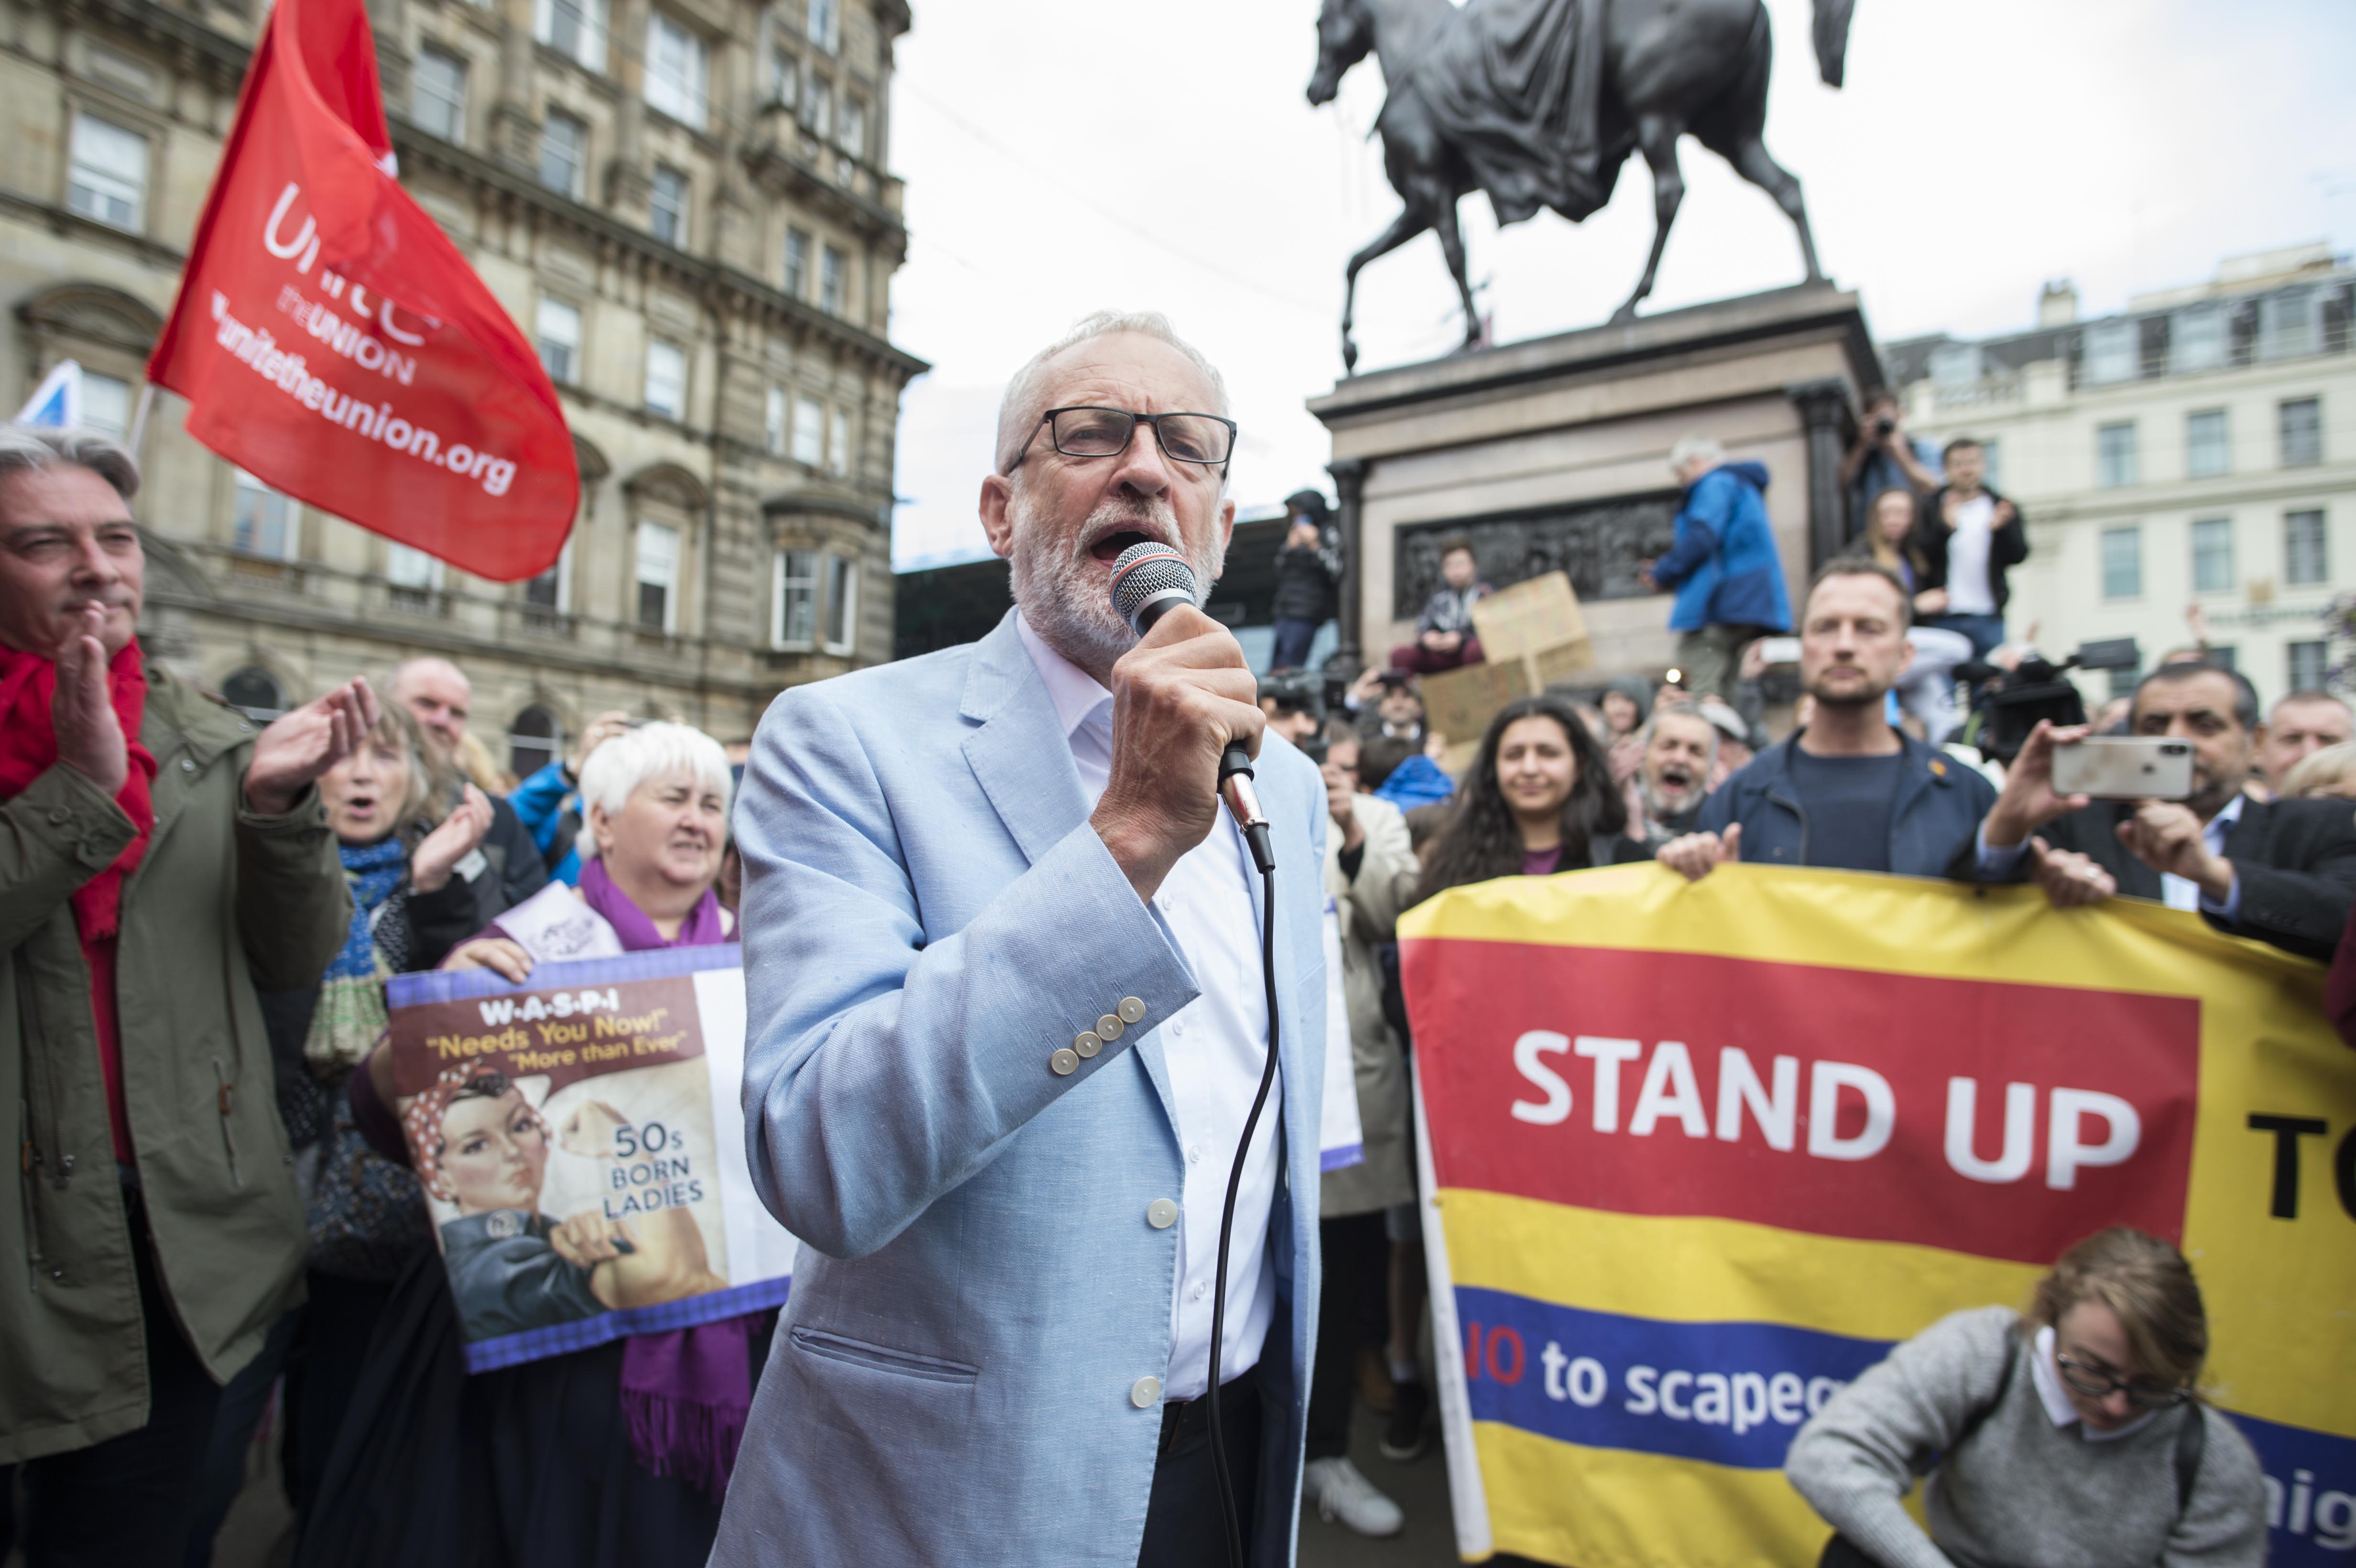 Thousands of protestors gathered in Glasgow's George Square yesterday for a "Stop the Coup" protest . Labour leader Jeremy Corbyn was one of the speakers at the rally